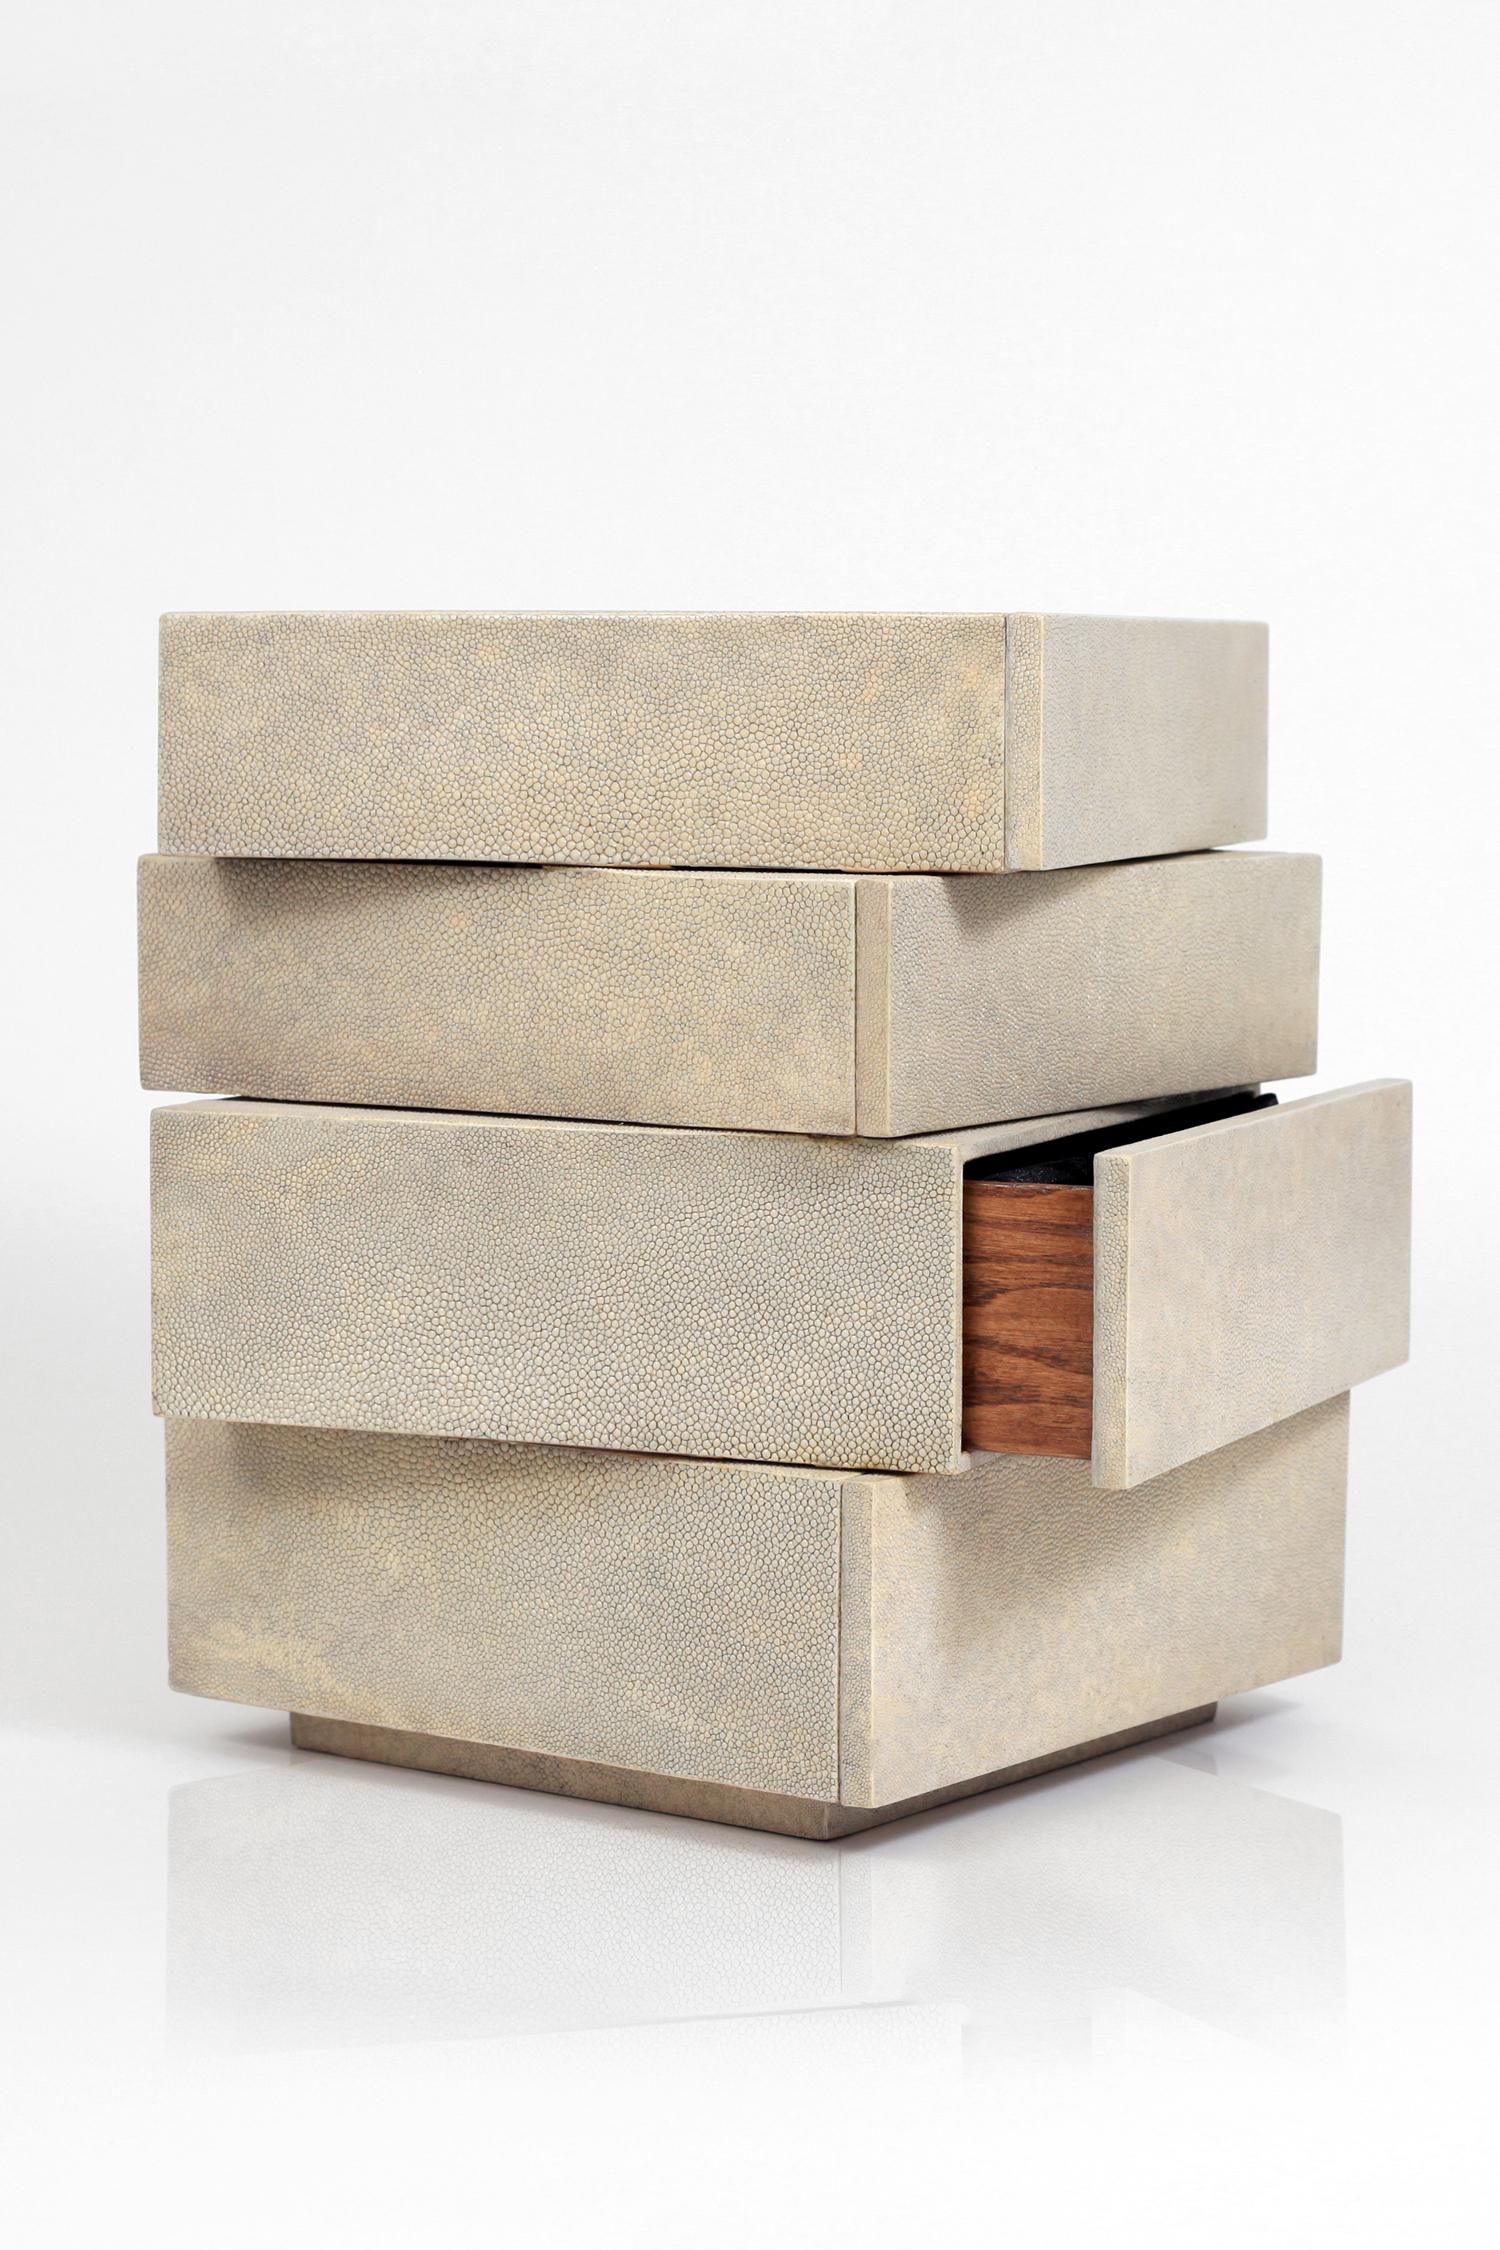 The irregular stacked jewelry chest in cream shagreen by R&Y Augousti is a stunning geometric piece to store your personal items. This piece has 4 drawer compartments that have black velvet trays. See images at end of slide of other jewelry chests